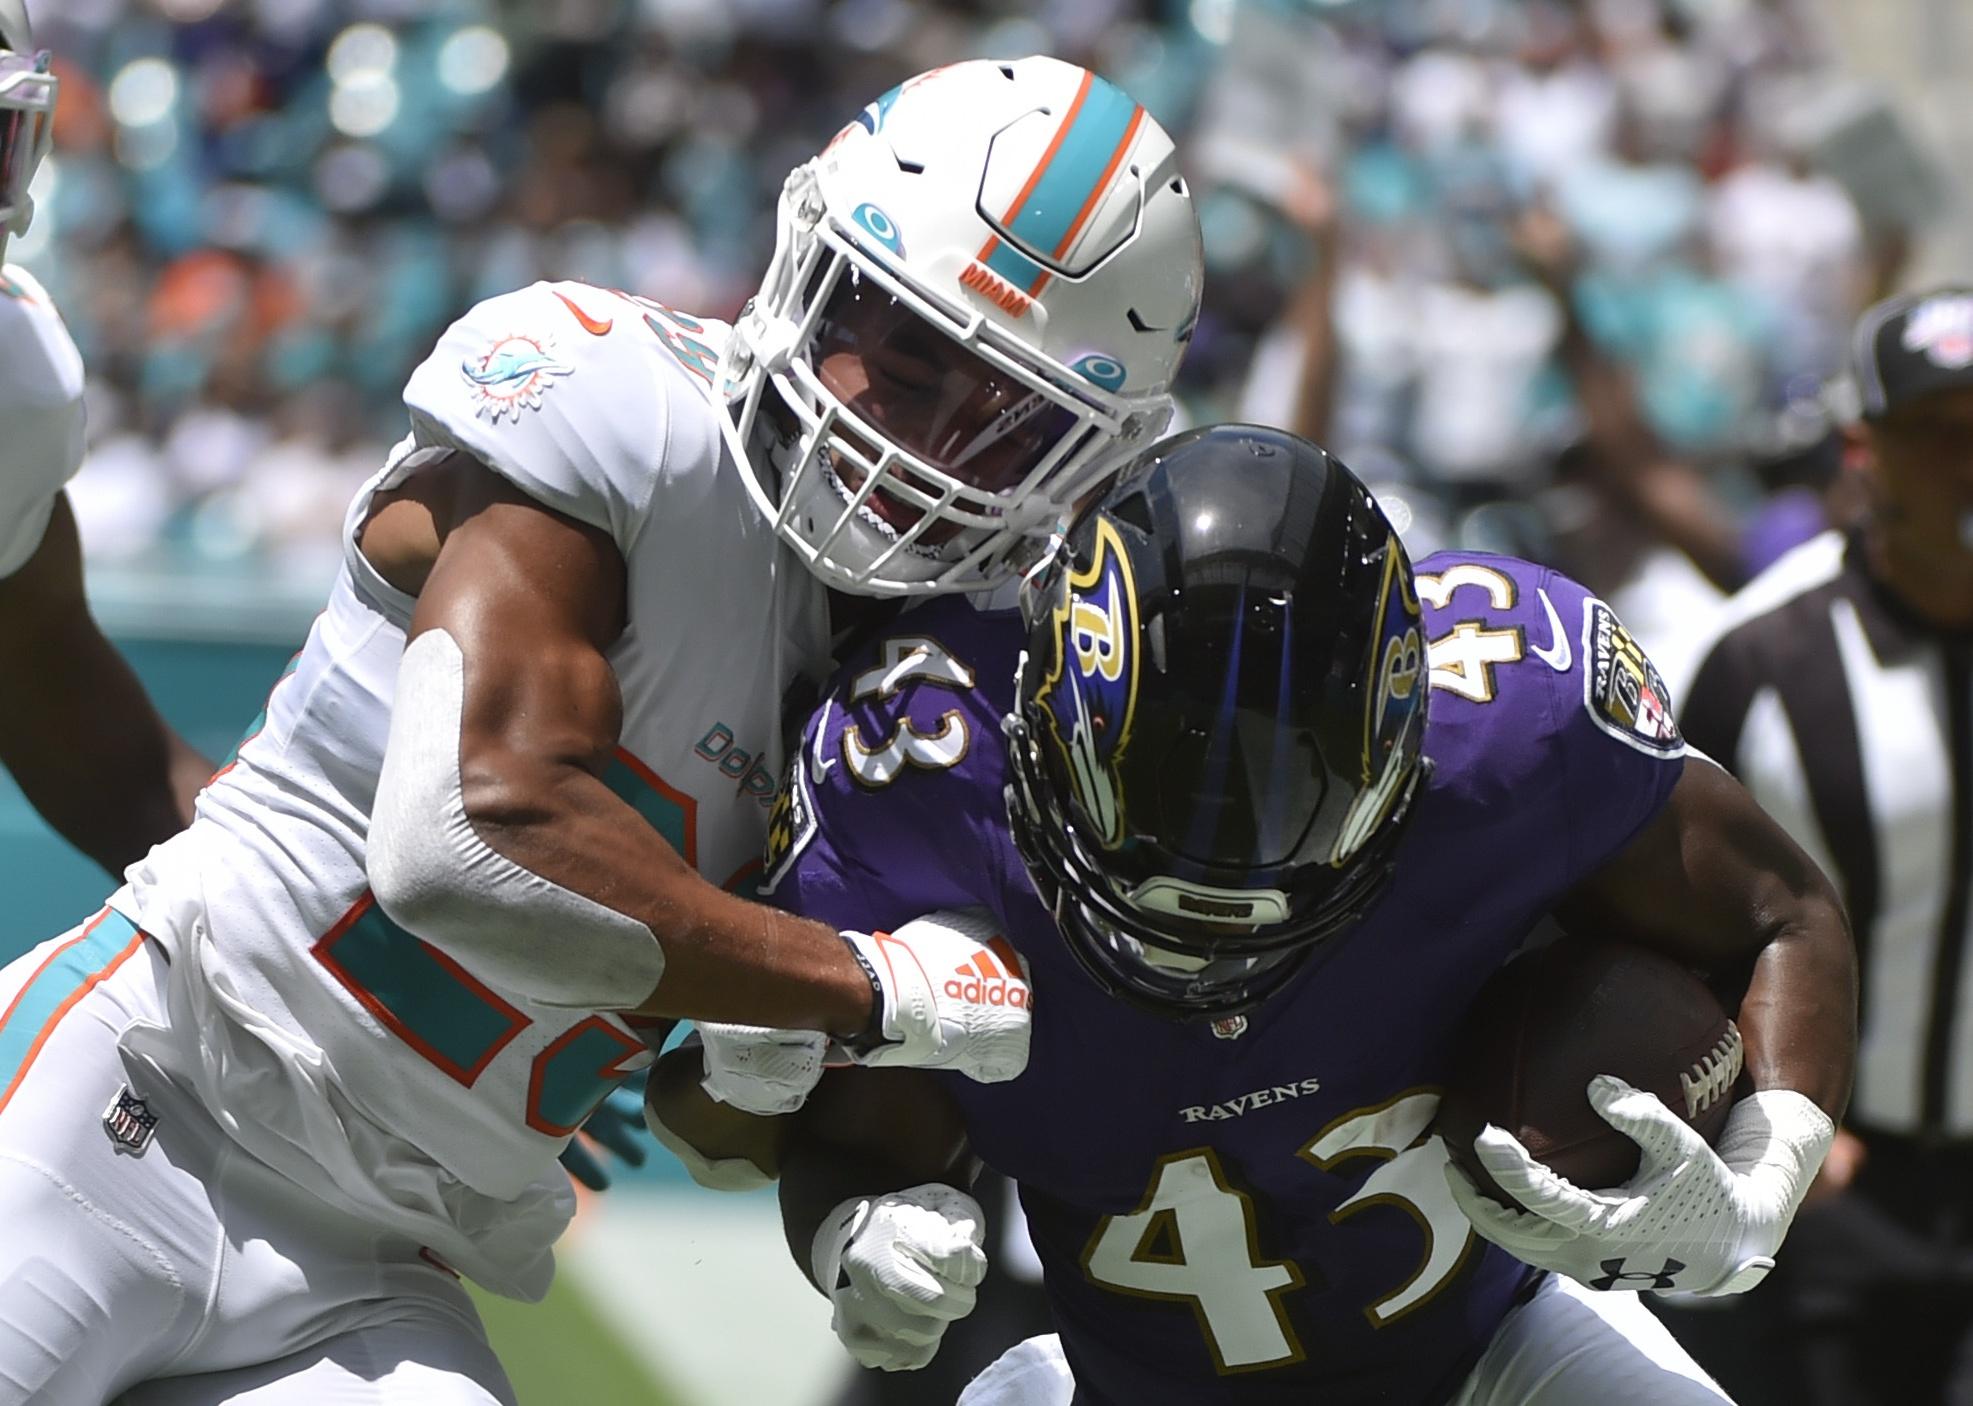 Minkah Fitzpatrick of the Miami Dolphins knocks Justice Hill of the Baltimore Ravens out of bounds.